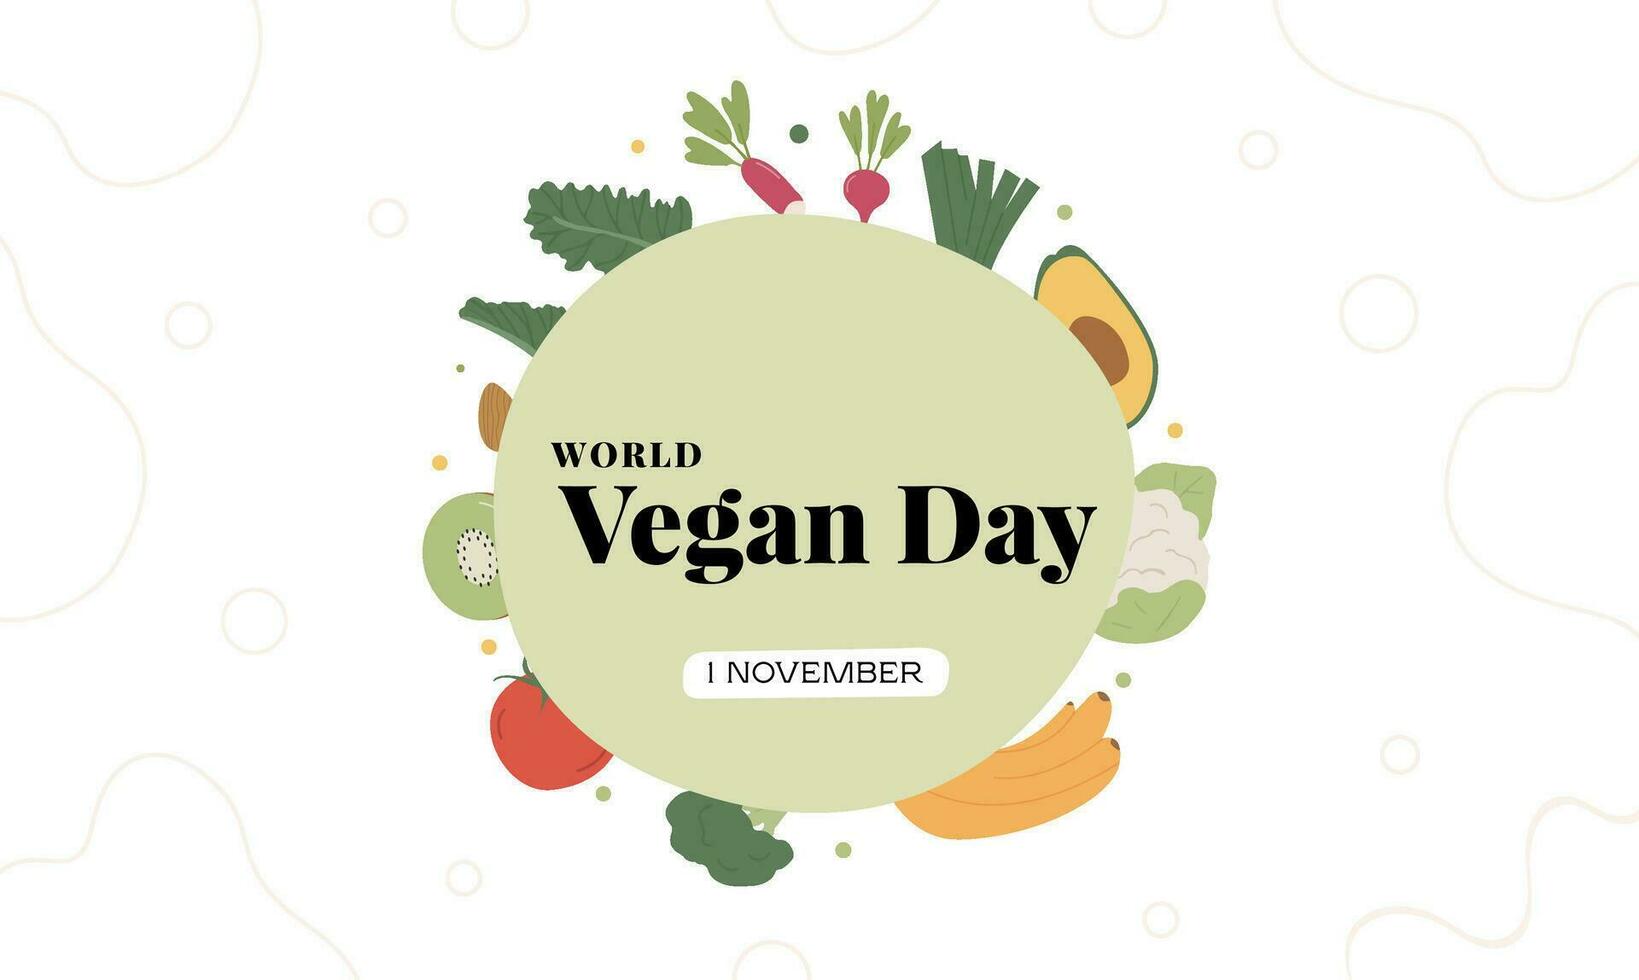 World Vegan Day. Round vegetables and fruits frame poster. Circle of healthy organic veggies with place for text. Banner template for dietary food concept. Vector flat illustration on white background